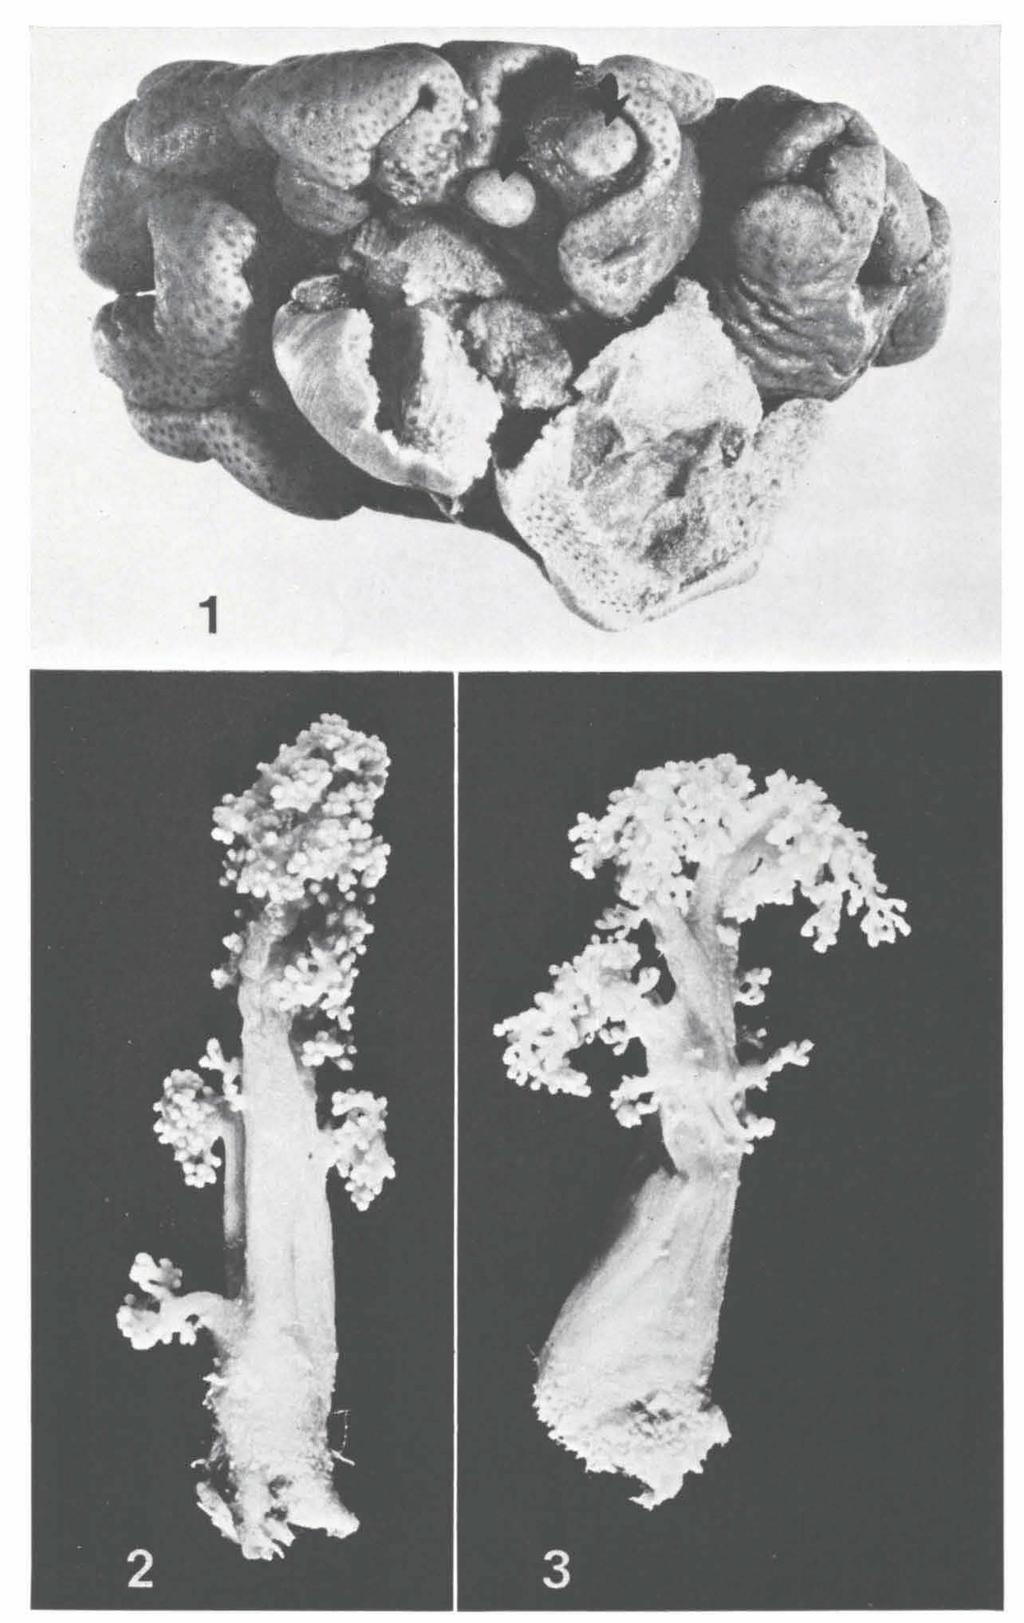 ZOOLOGISCHE MEDEDELINGEN 53 (6) PL. 3 Fig. ι. Sarcophyton gemmatum sp. nov., paratype, Sharm esh Sheikh, RMNH Coel. no. 12295, side-view; in the middle, close to the upper side of the colony, two buds are visible; X 1.